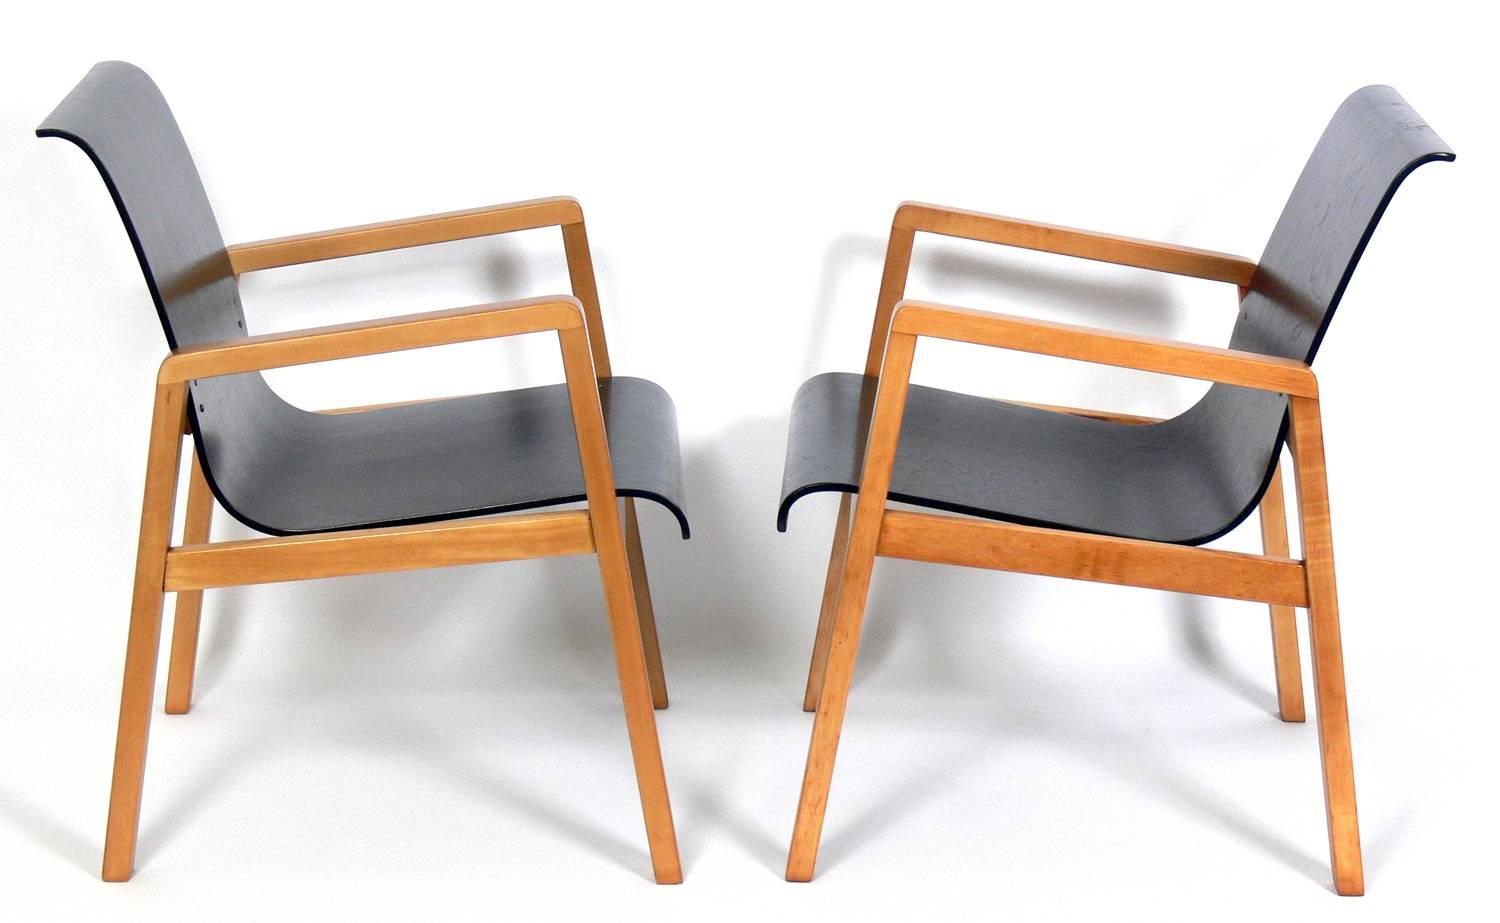 Pair of bentwood modern lounge chairs, designed by Alvar Aalto, circa 1940s. They have been refinished and are ready to use.